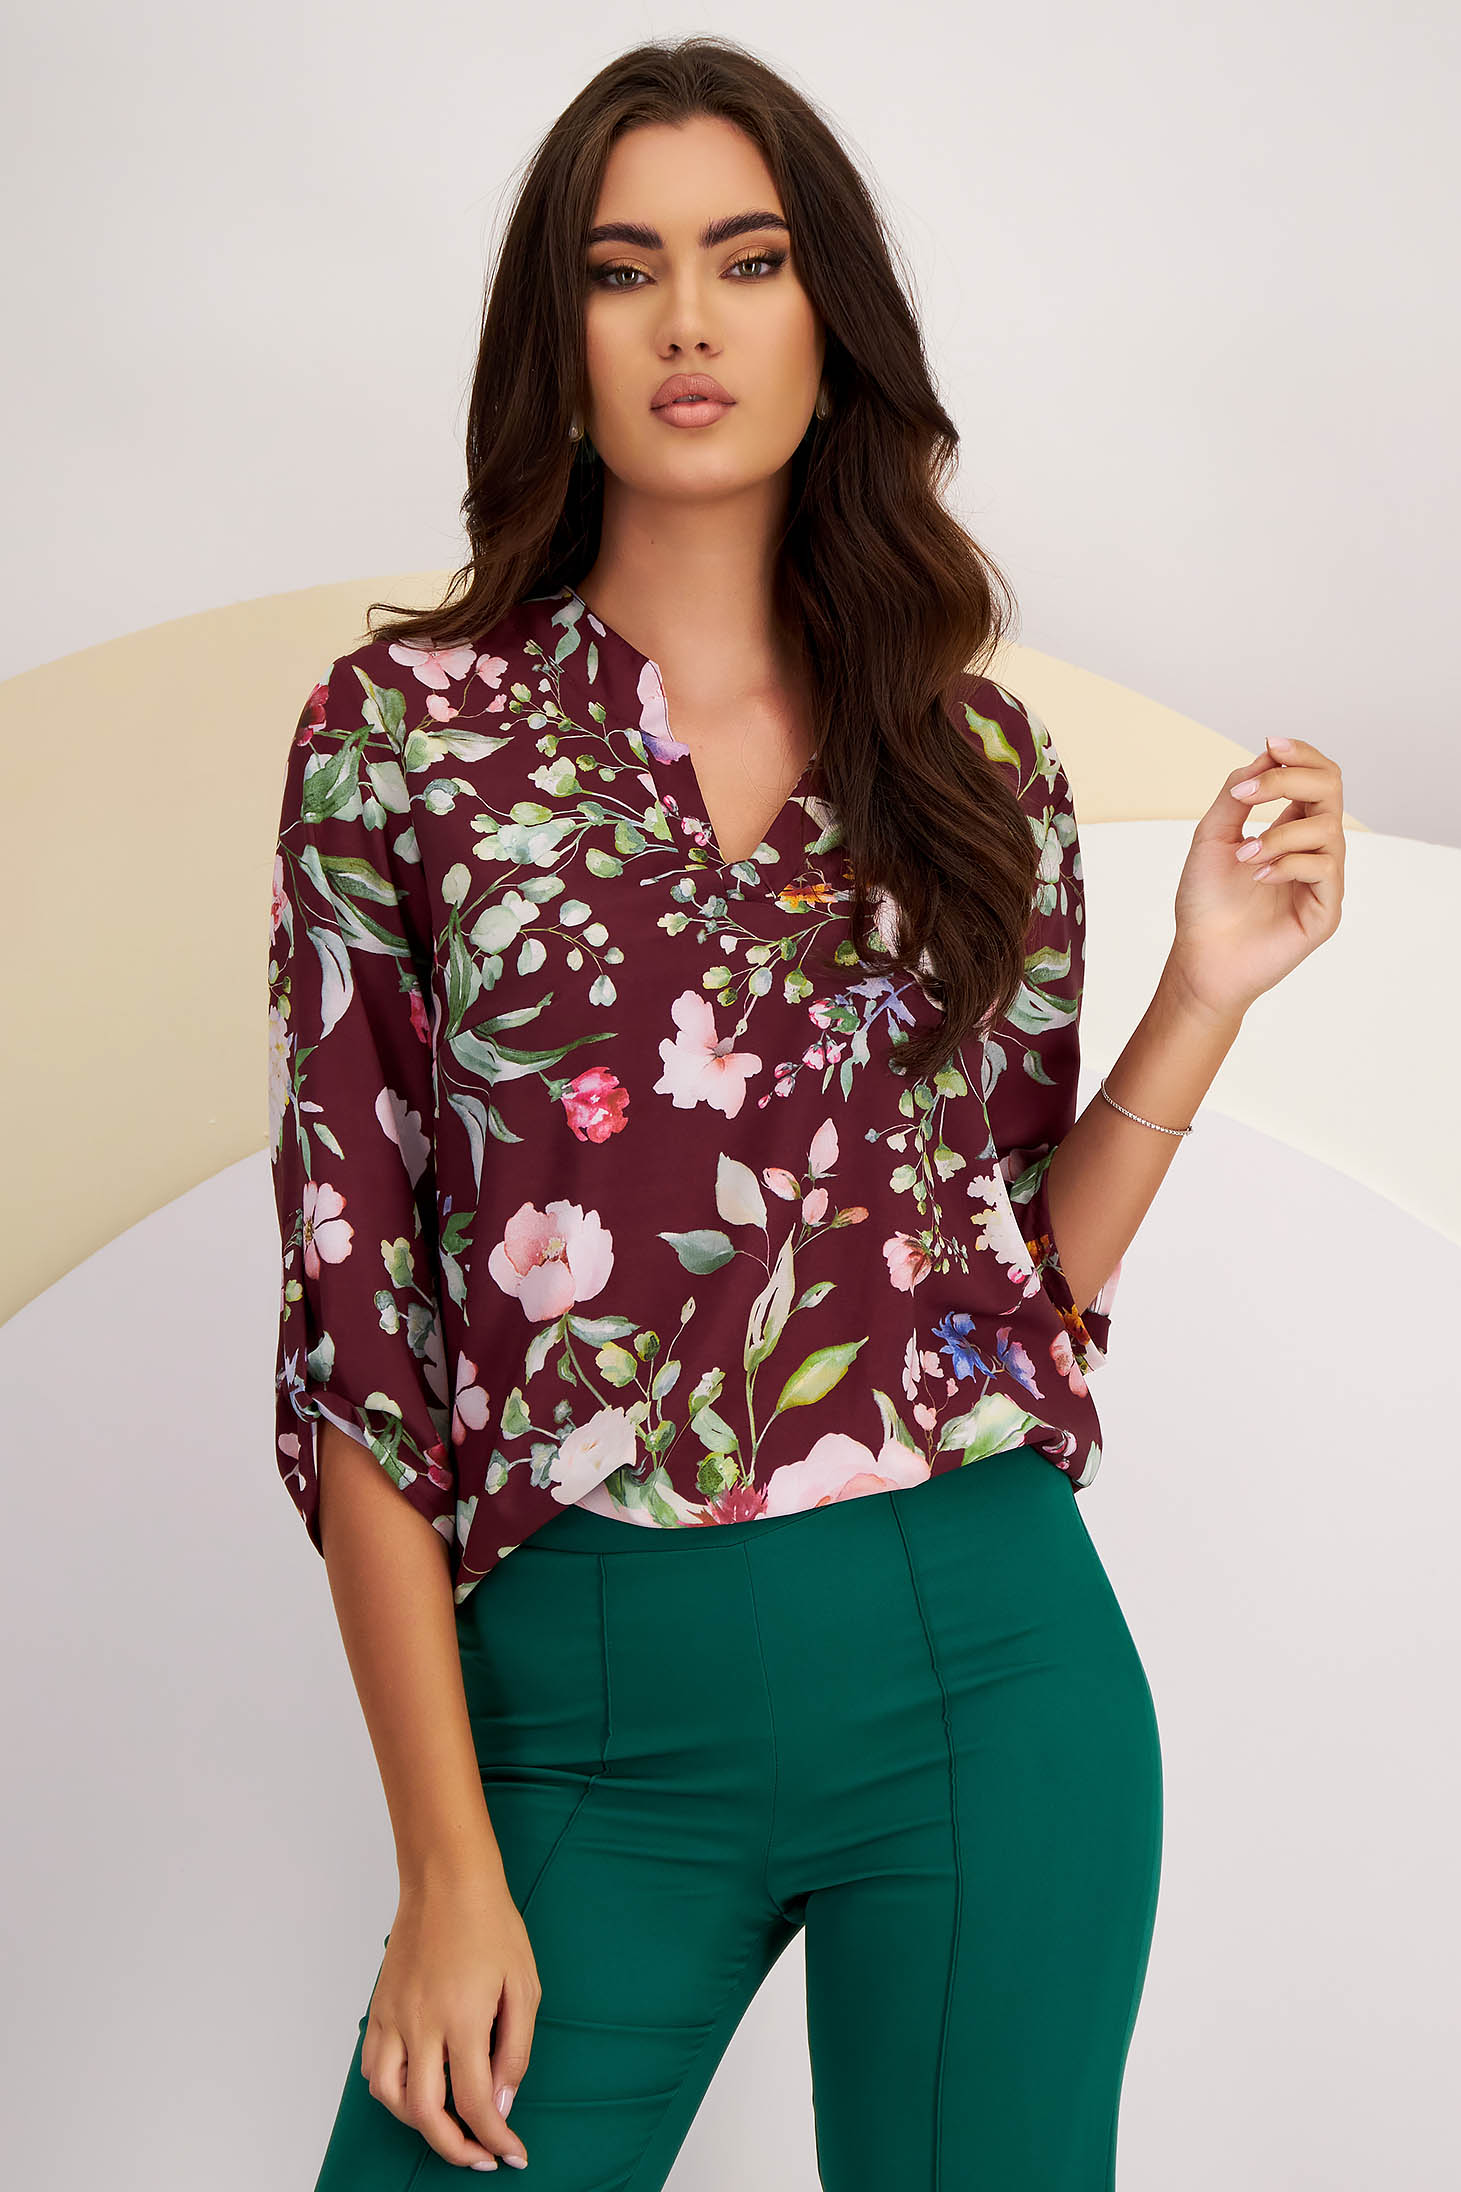 Ladies' Blouse Made of Thin Material with Loose Fit and Floral Print - Lady Pandora